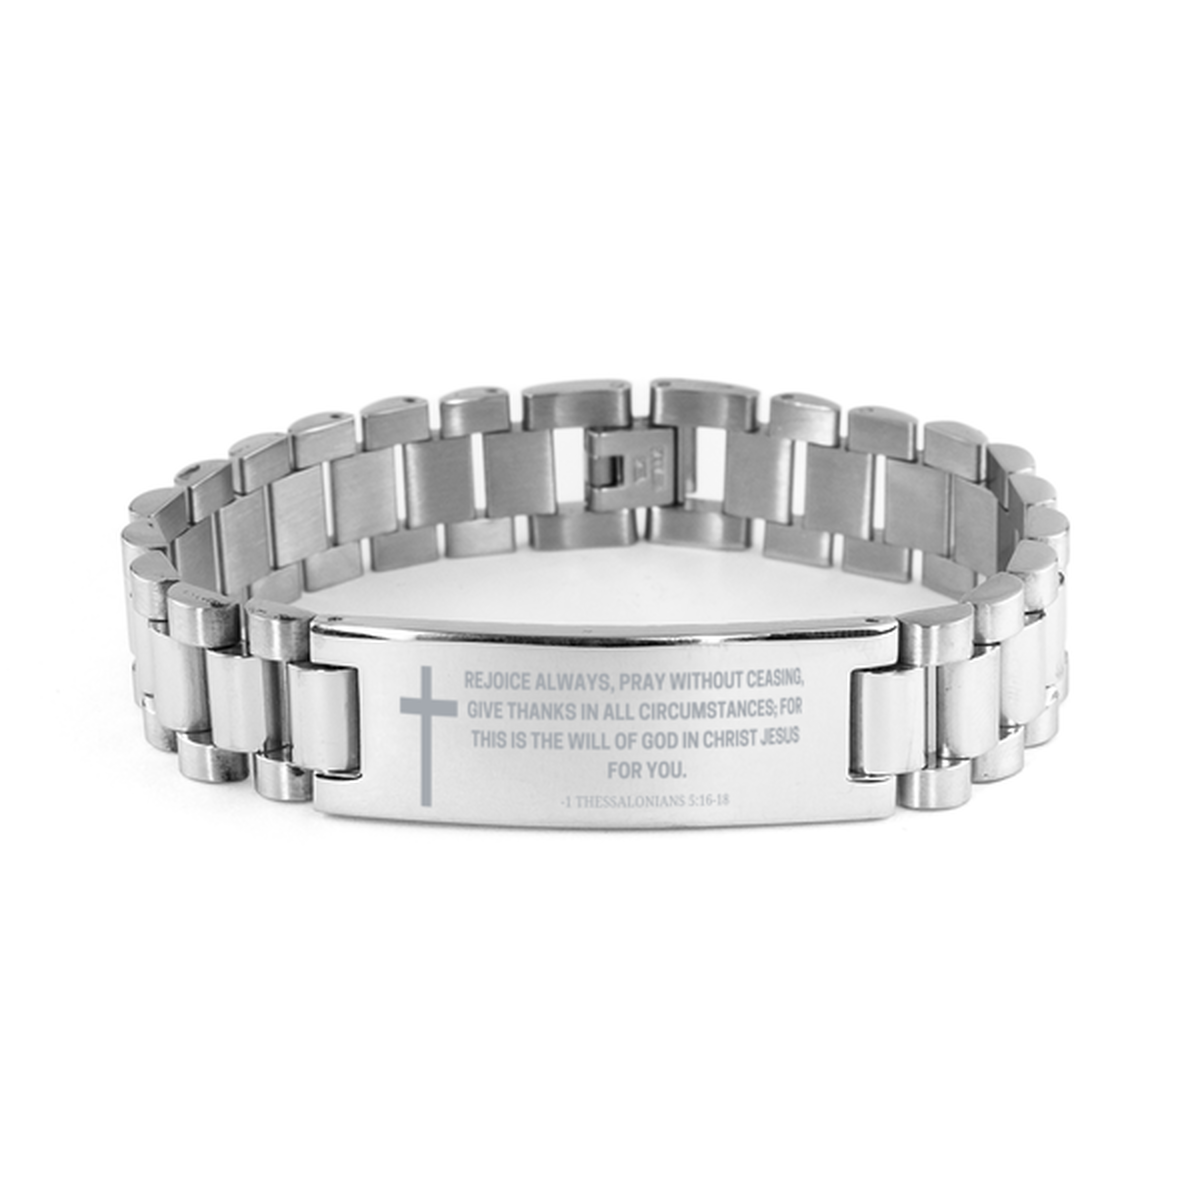 Baptism Gifts For Teenage Boys Girls, Christian Bible Verse Ladder Stainless Steel Bracelet, Rejoice always, pray without ceasing, Catholic Confirmation Gifts for Son, Godson, Grandson, Nephew